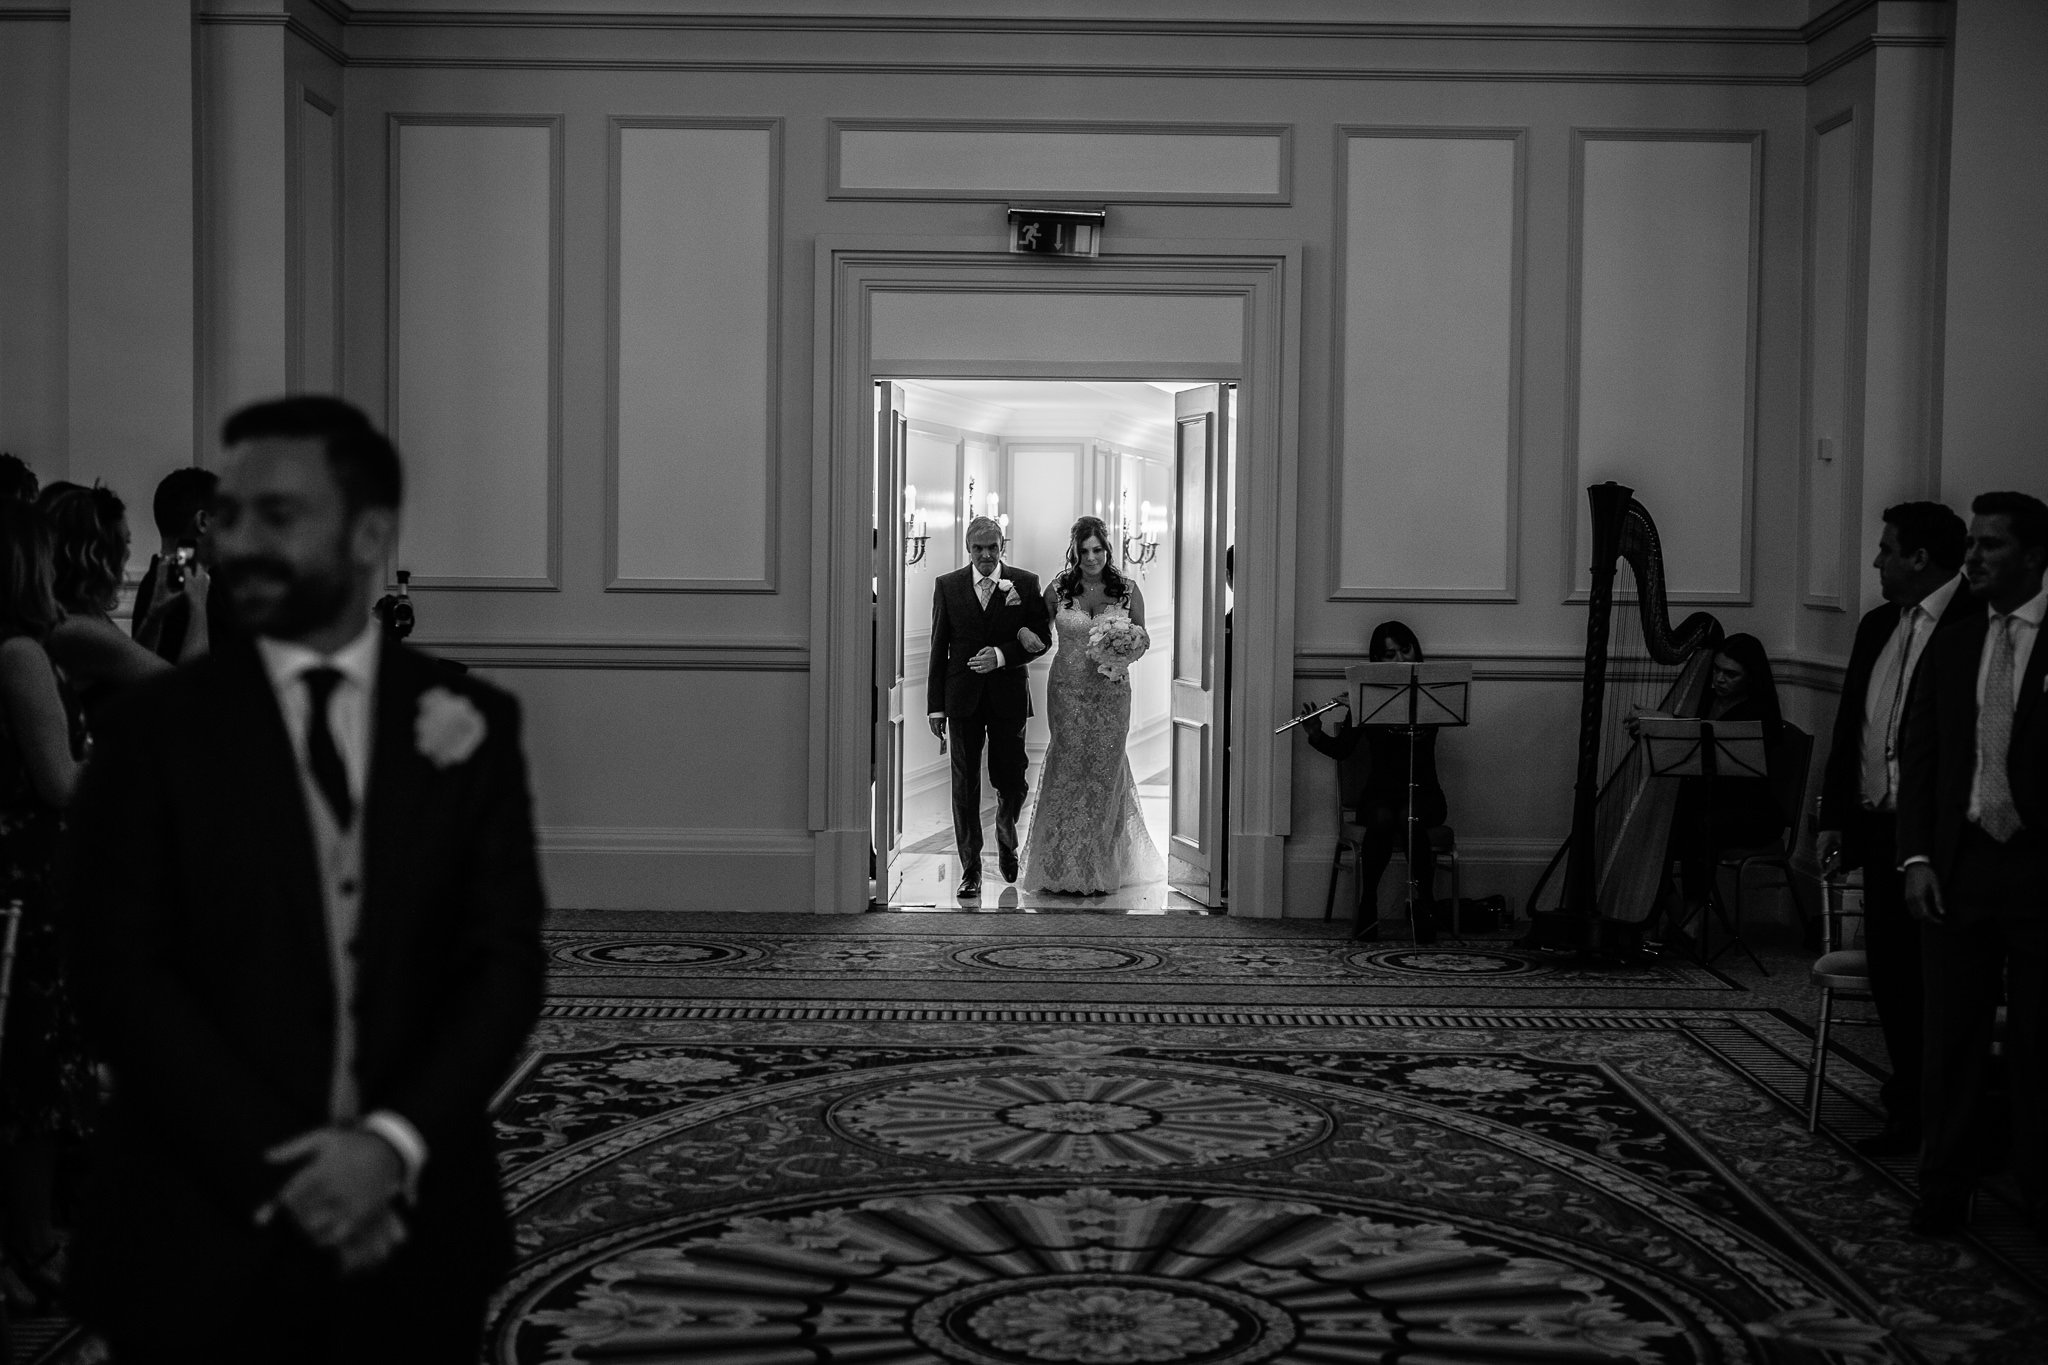  Bride enters the ceremony room at The Landmark London hotel 